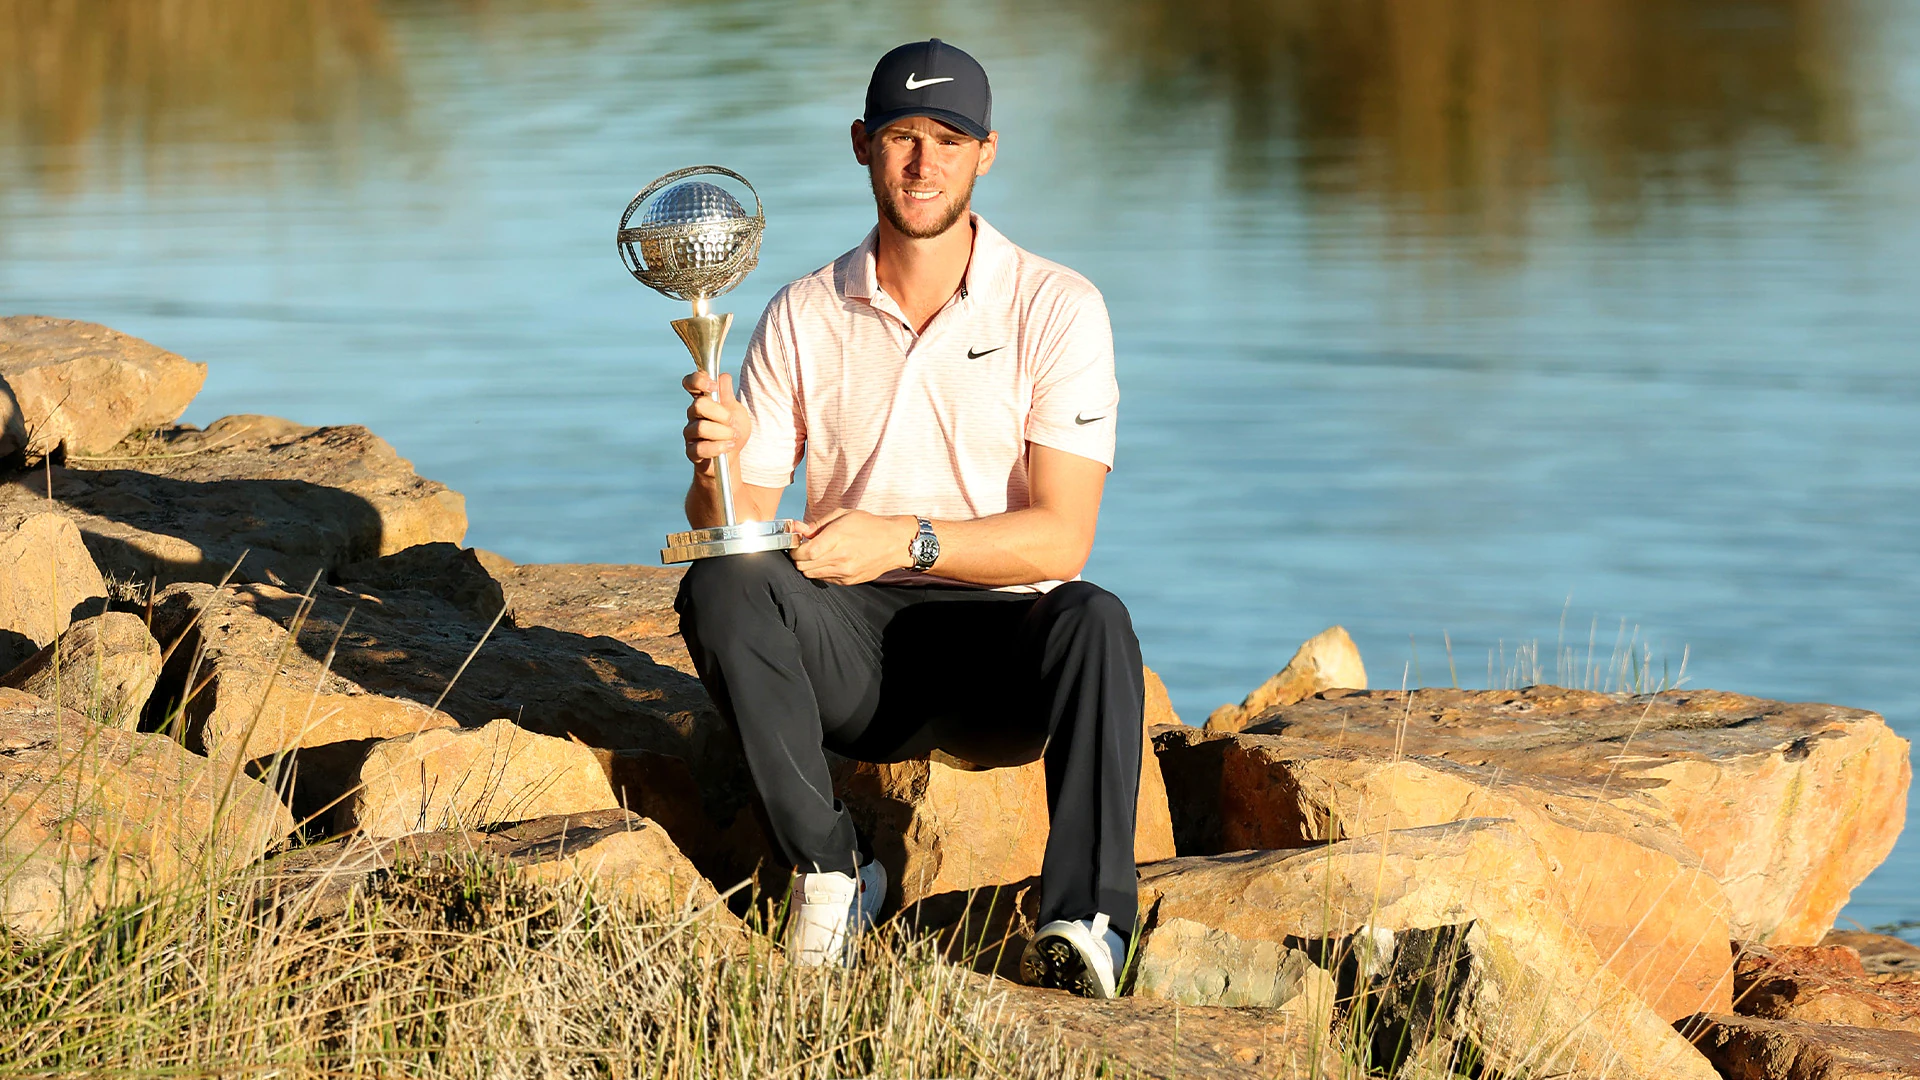 Thomas Pieters wins Portugal Masters; first title since 2019